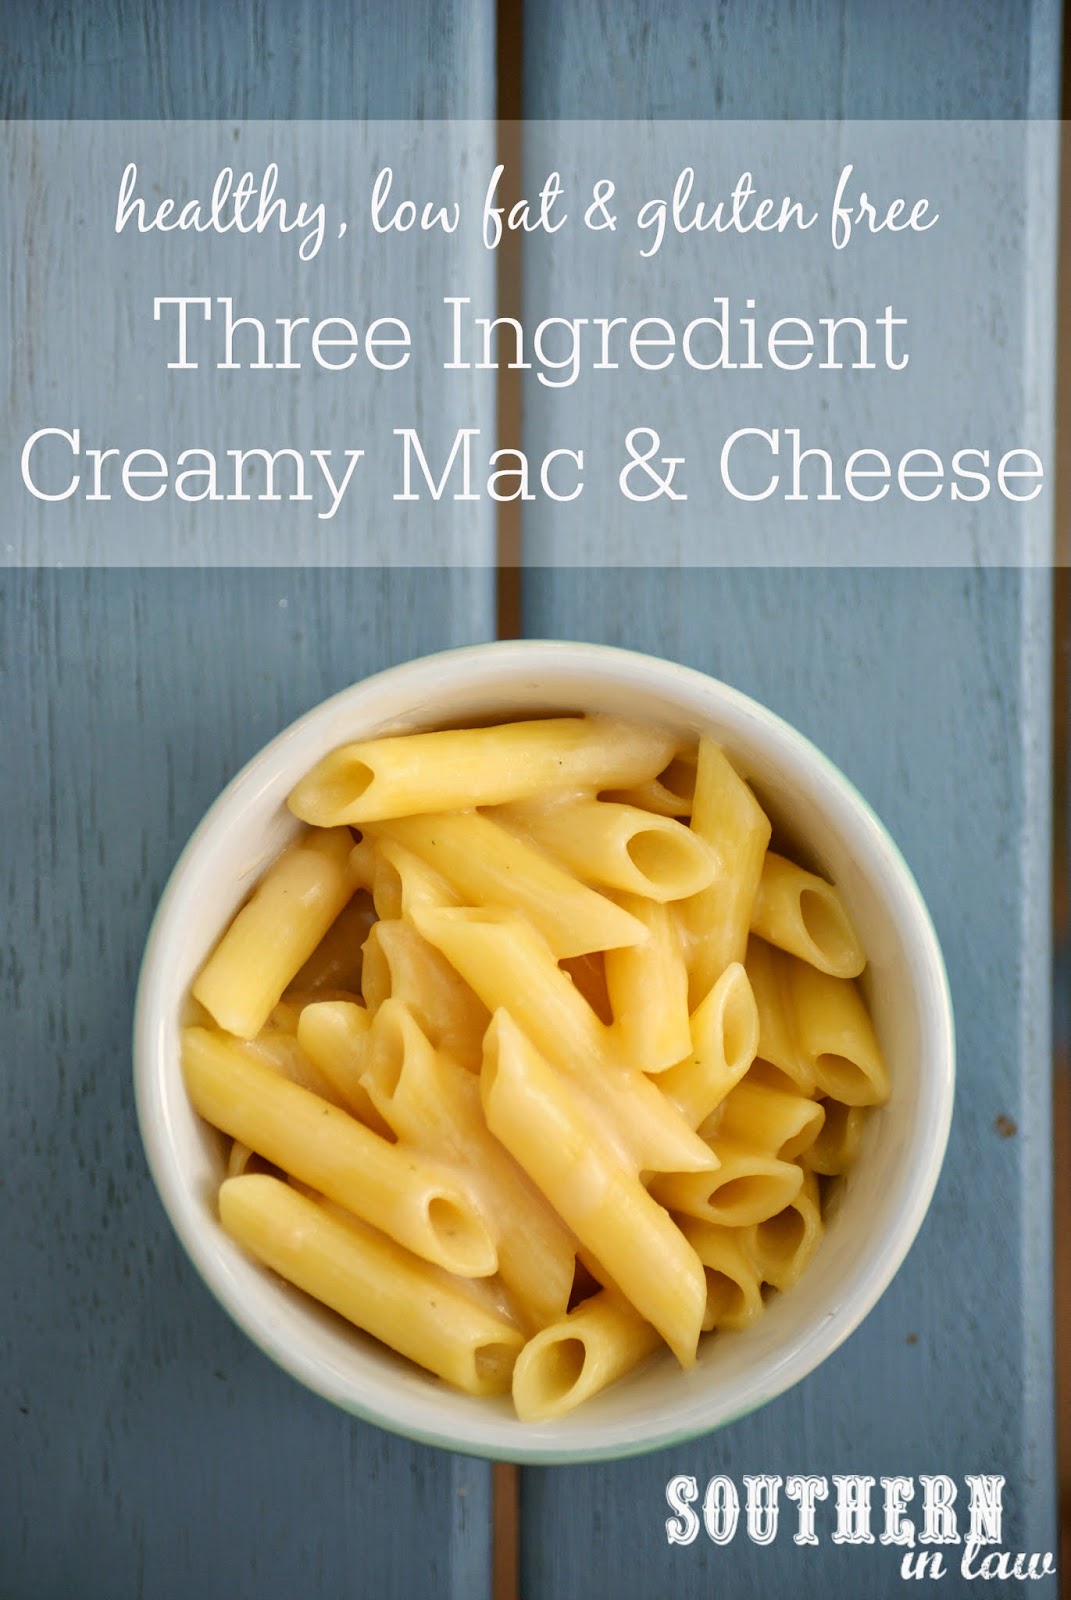 Healthy Three Ingredient Creamy Mac and Cheese Recipe - Healthy, low fat, gluten free, low calorie, dairy free